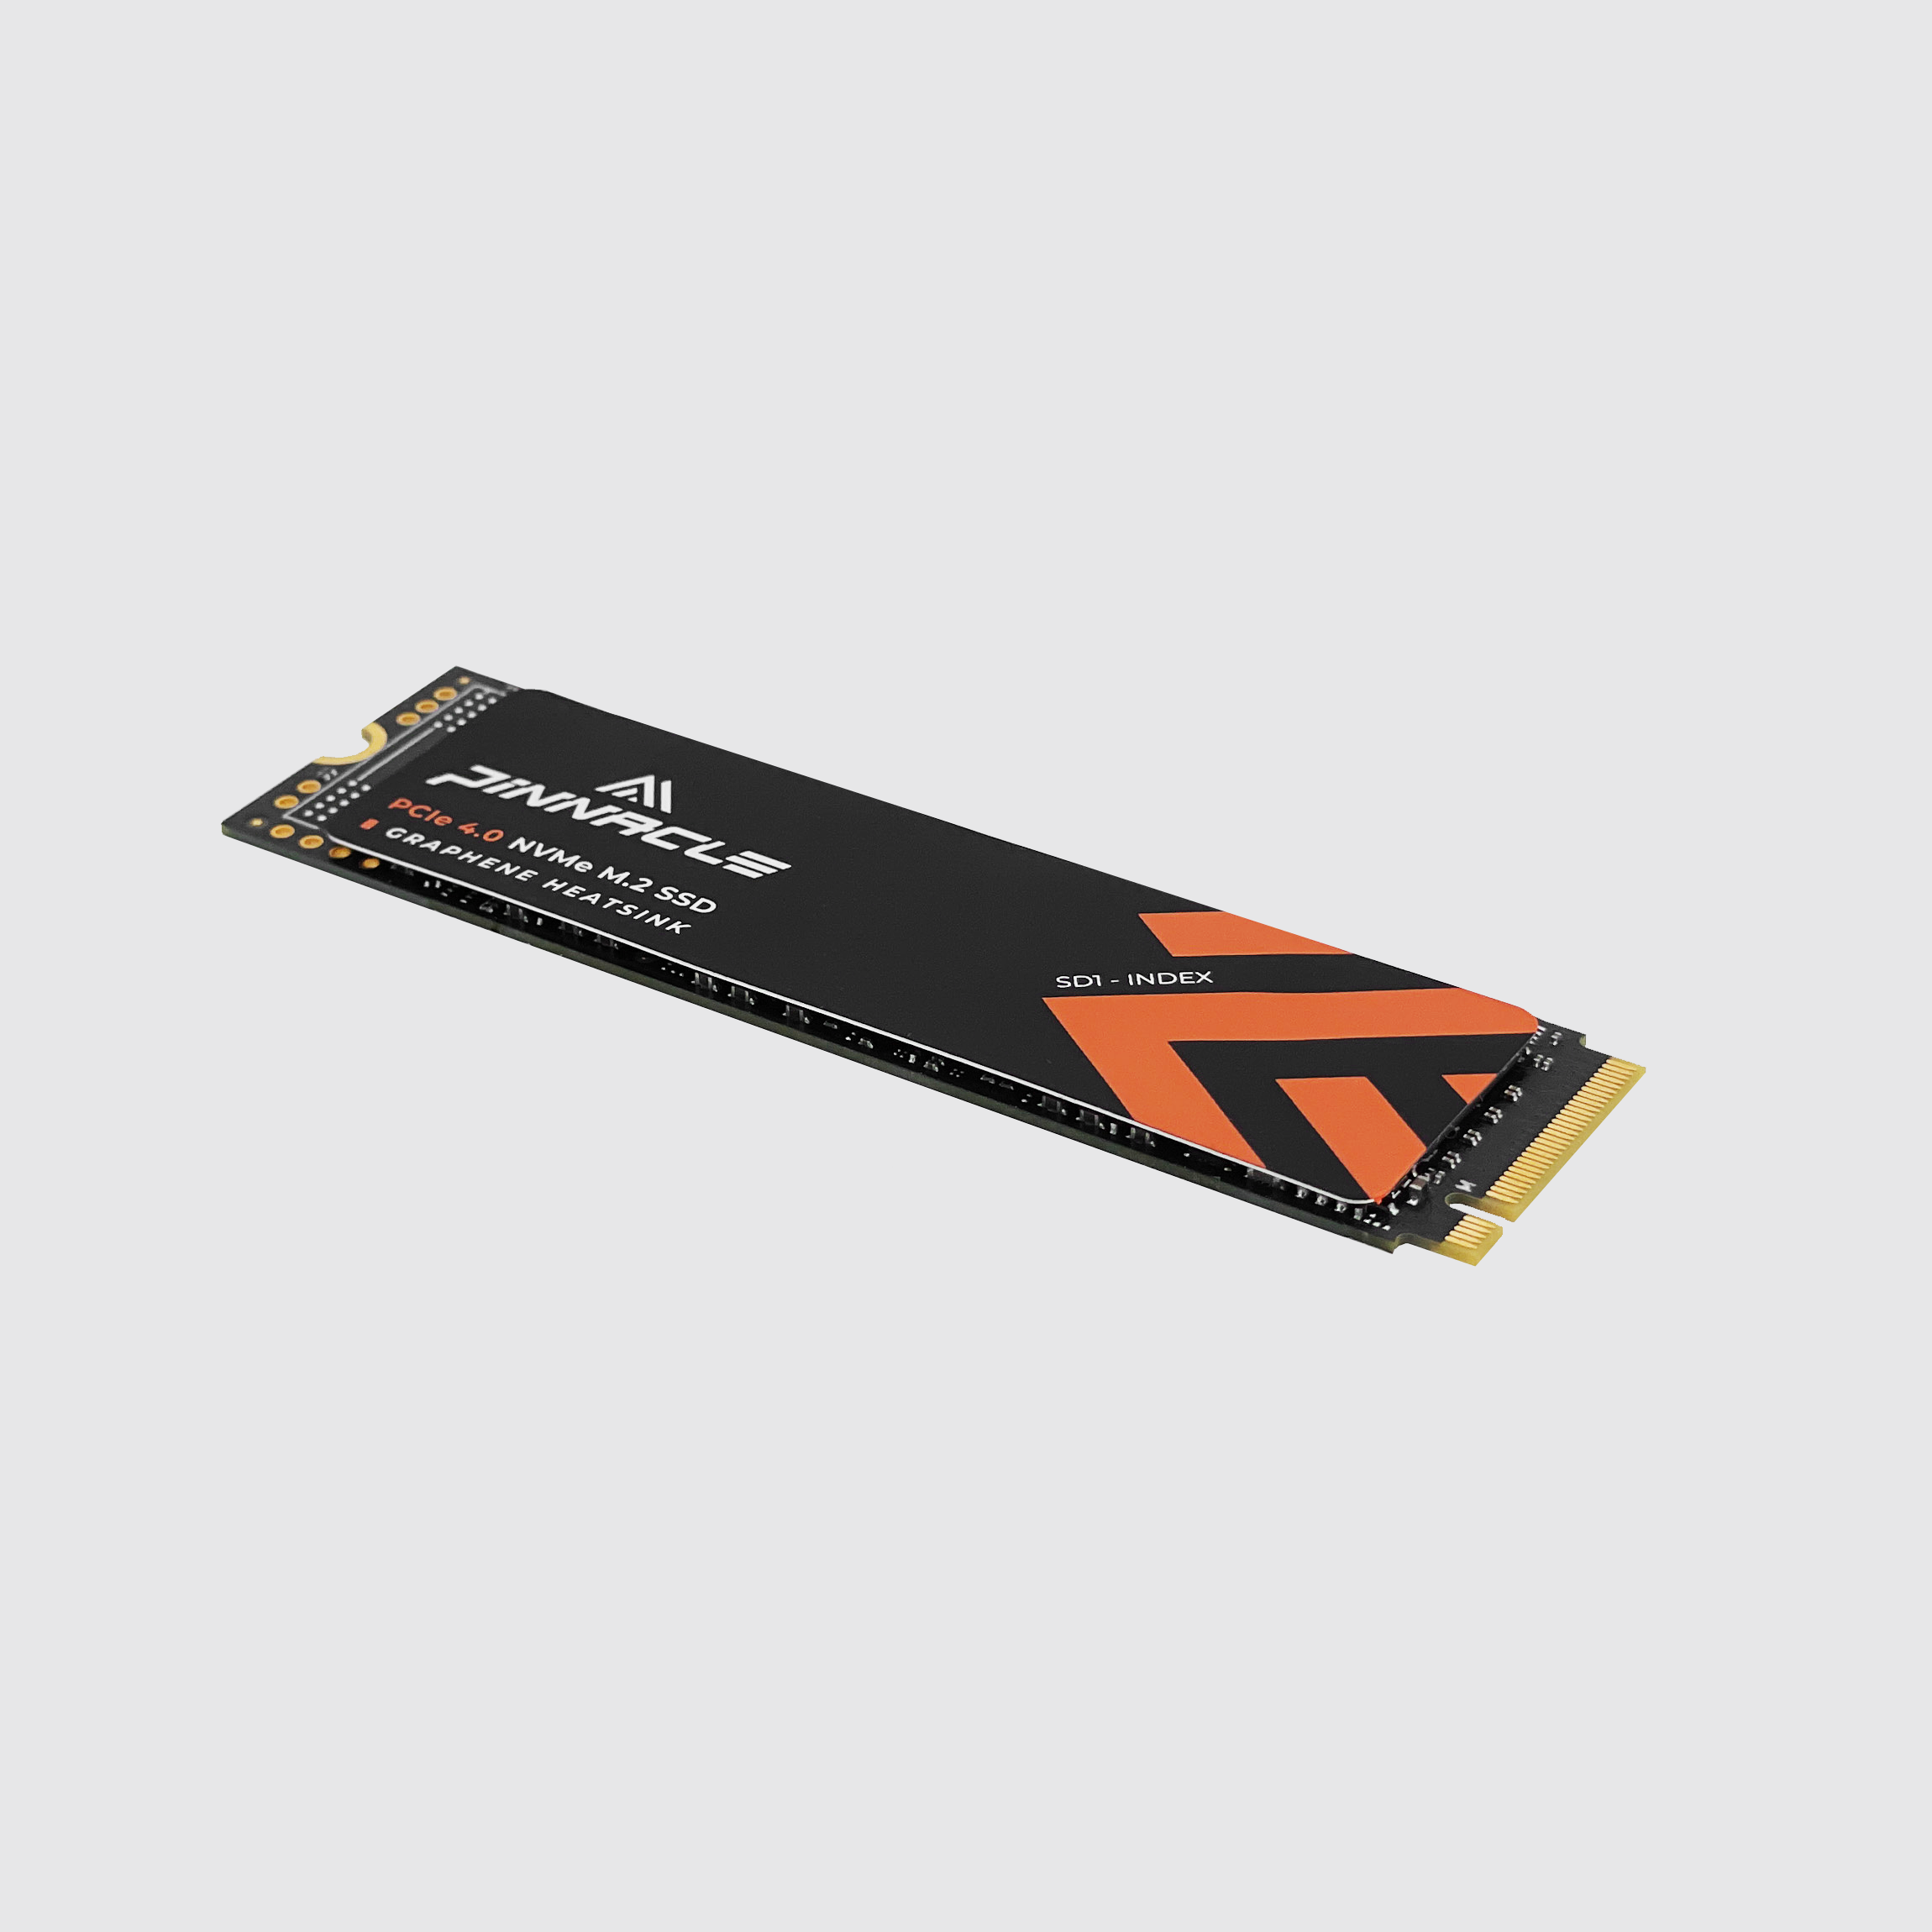 PINNACLE SD-1 INDEX PCIe Gen4x4 Graphene M.2 Solid State Drive